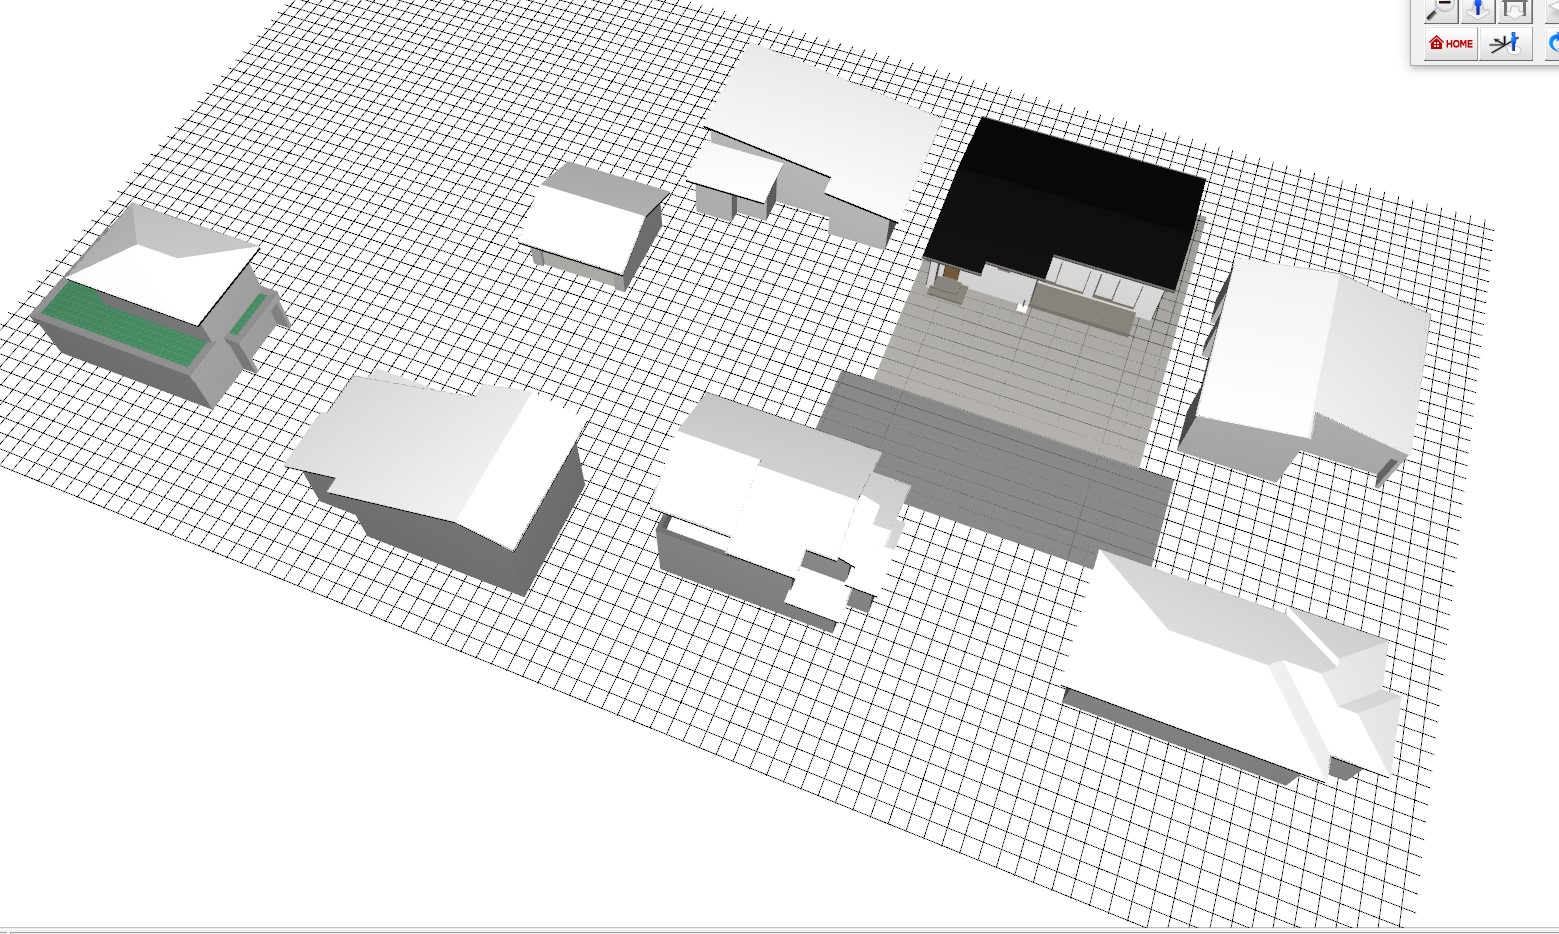 4.- Perspective monitor in CAD (ArchiTrend). Export in 3DS format from here